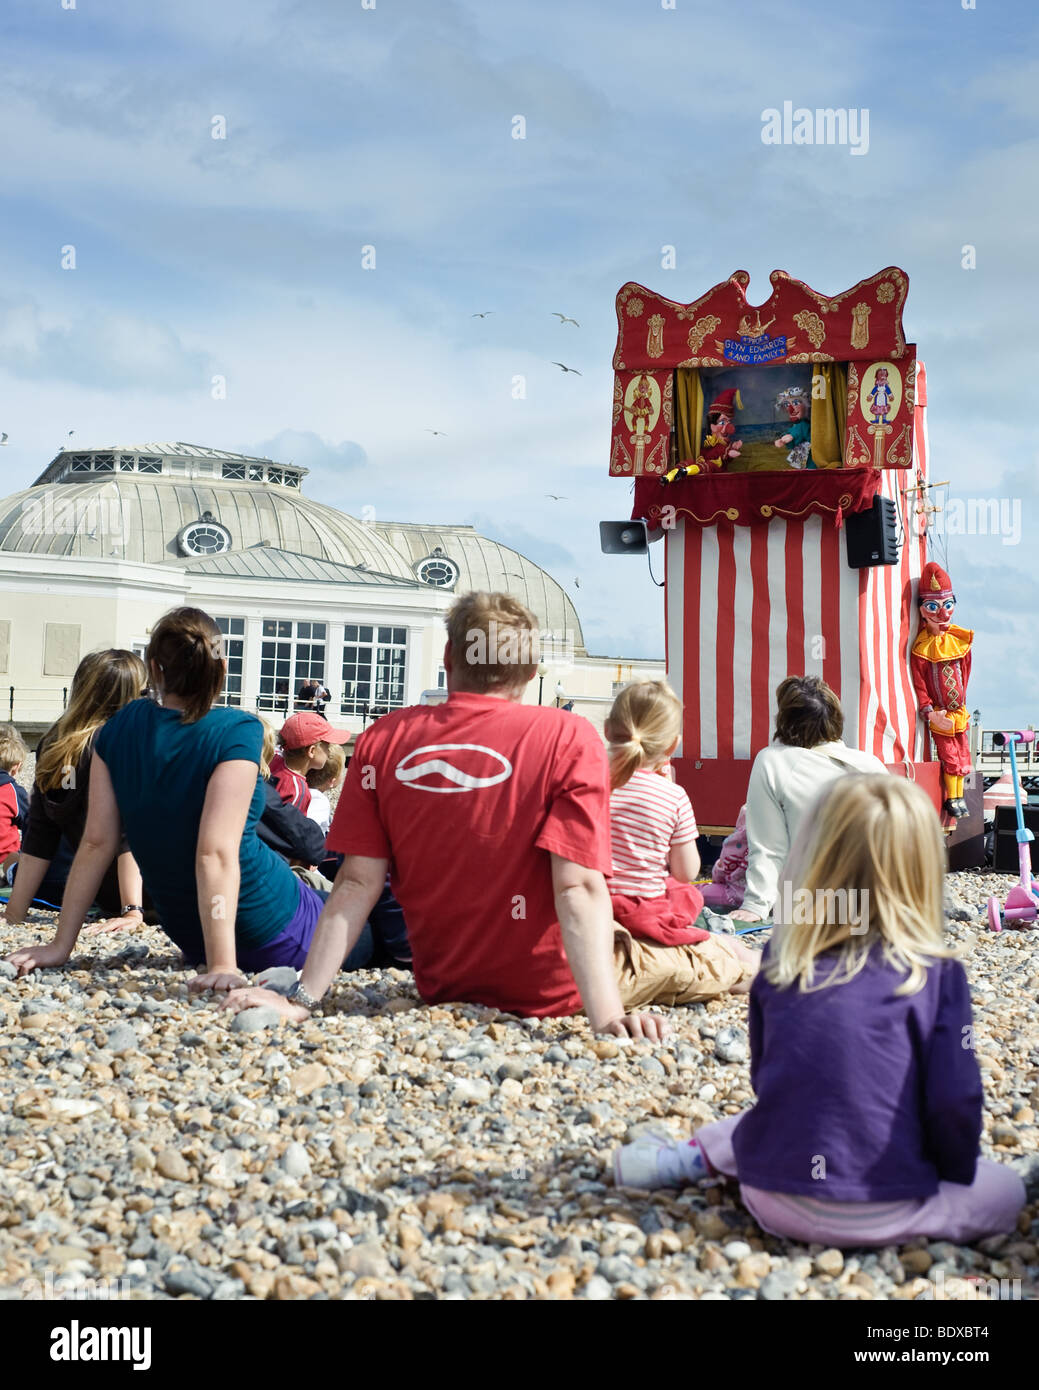 Families enjoy a Punch and Judy Show by the Sea Stock Photo